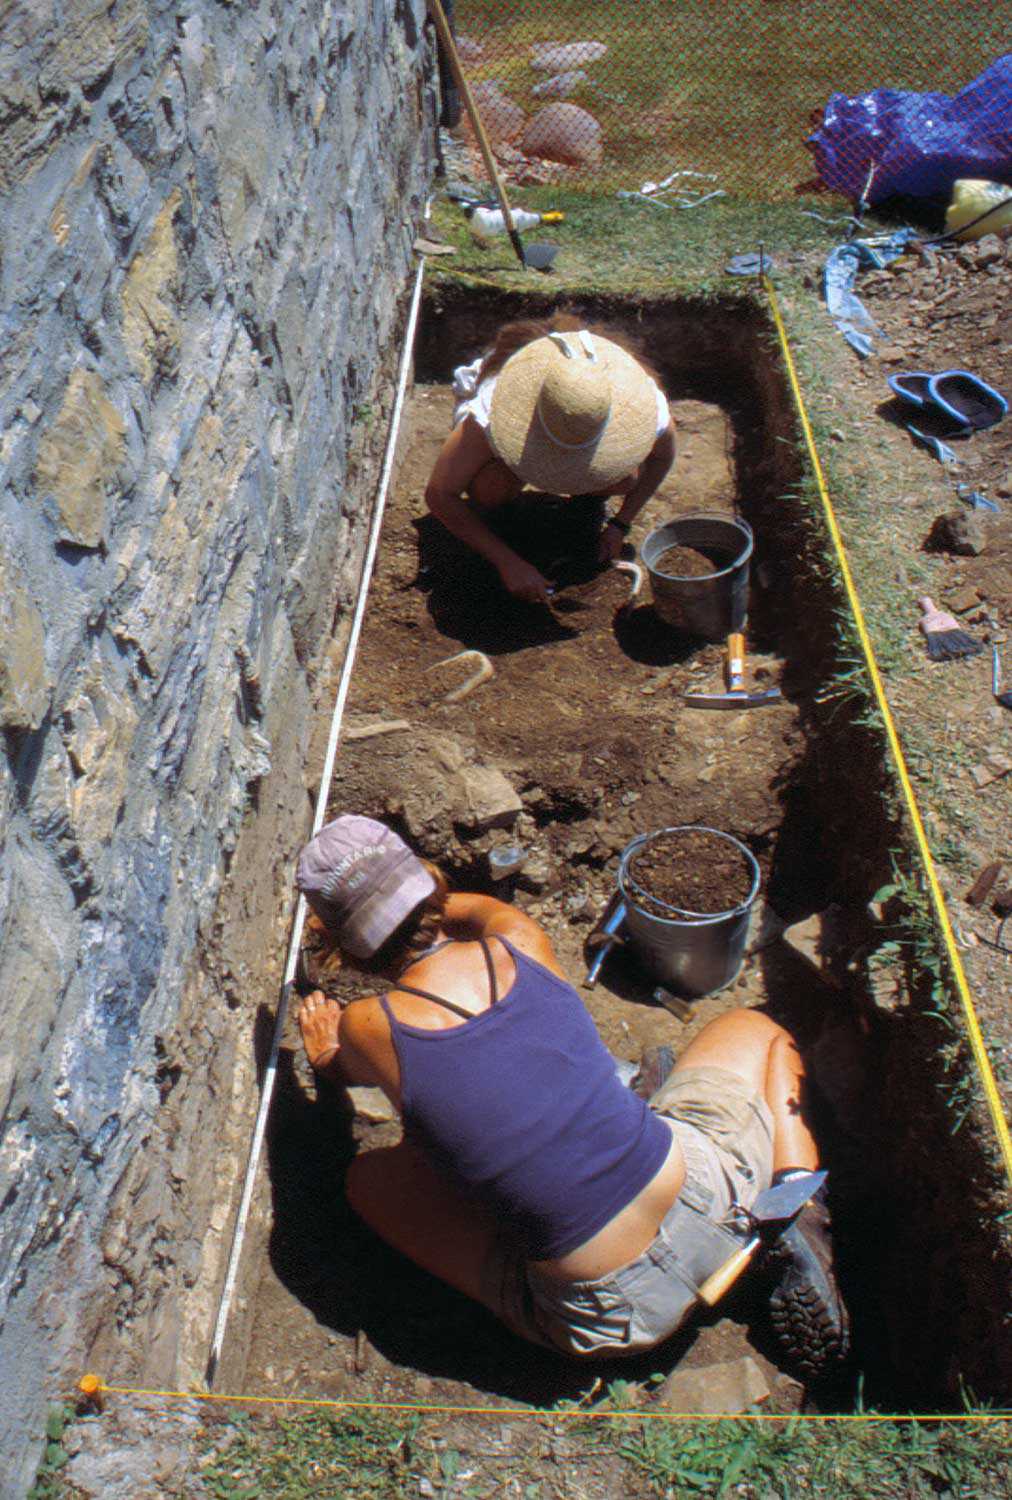 Archaeological dig at Macdonell-Williamson House